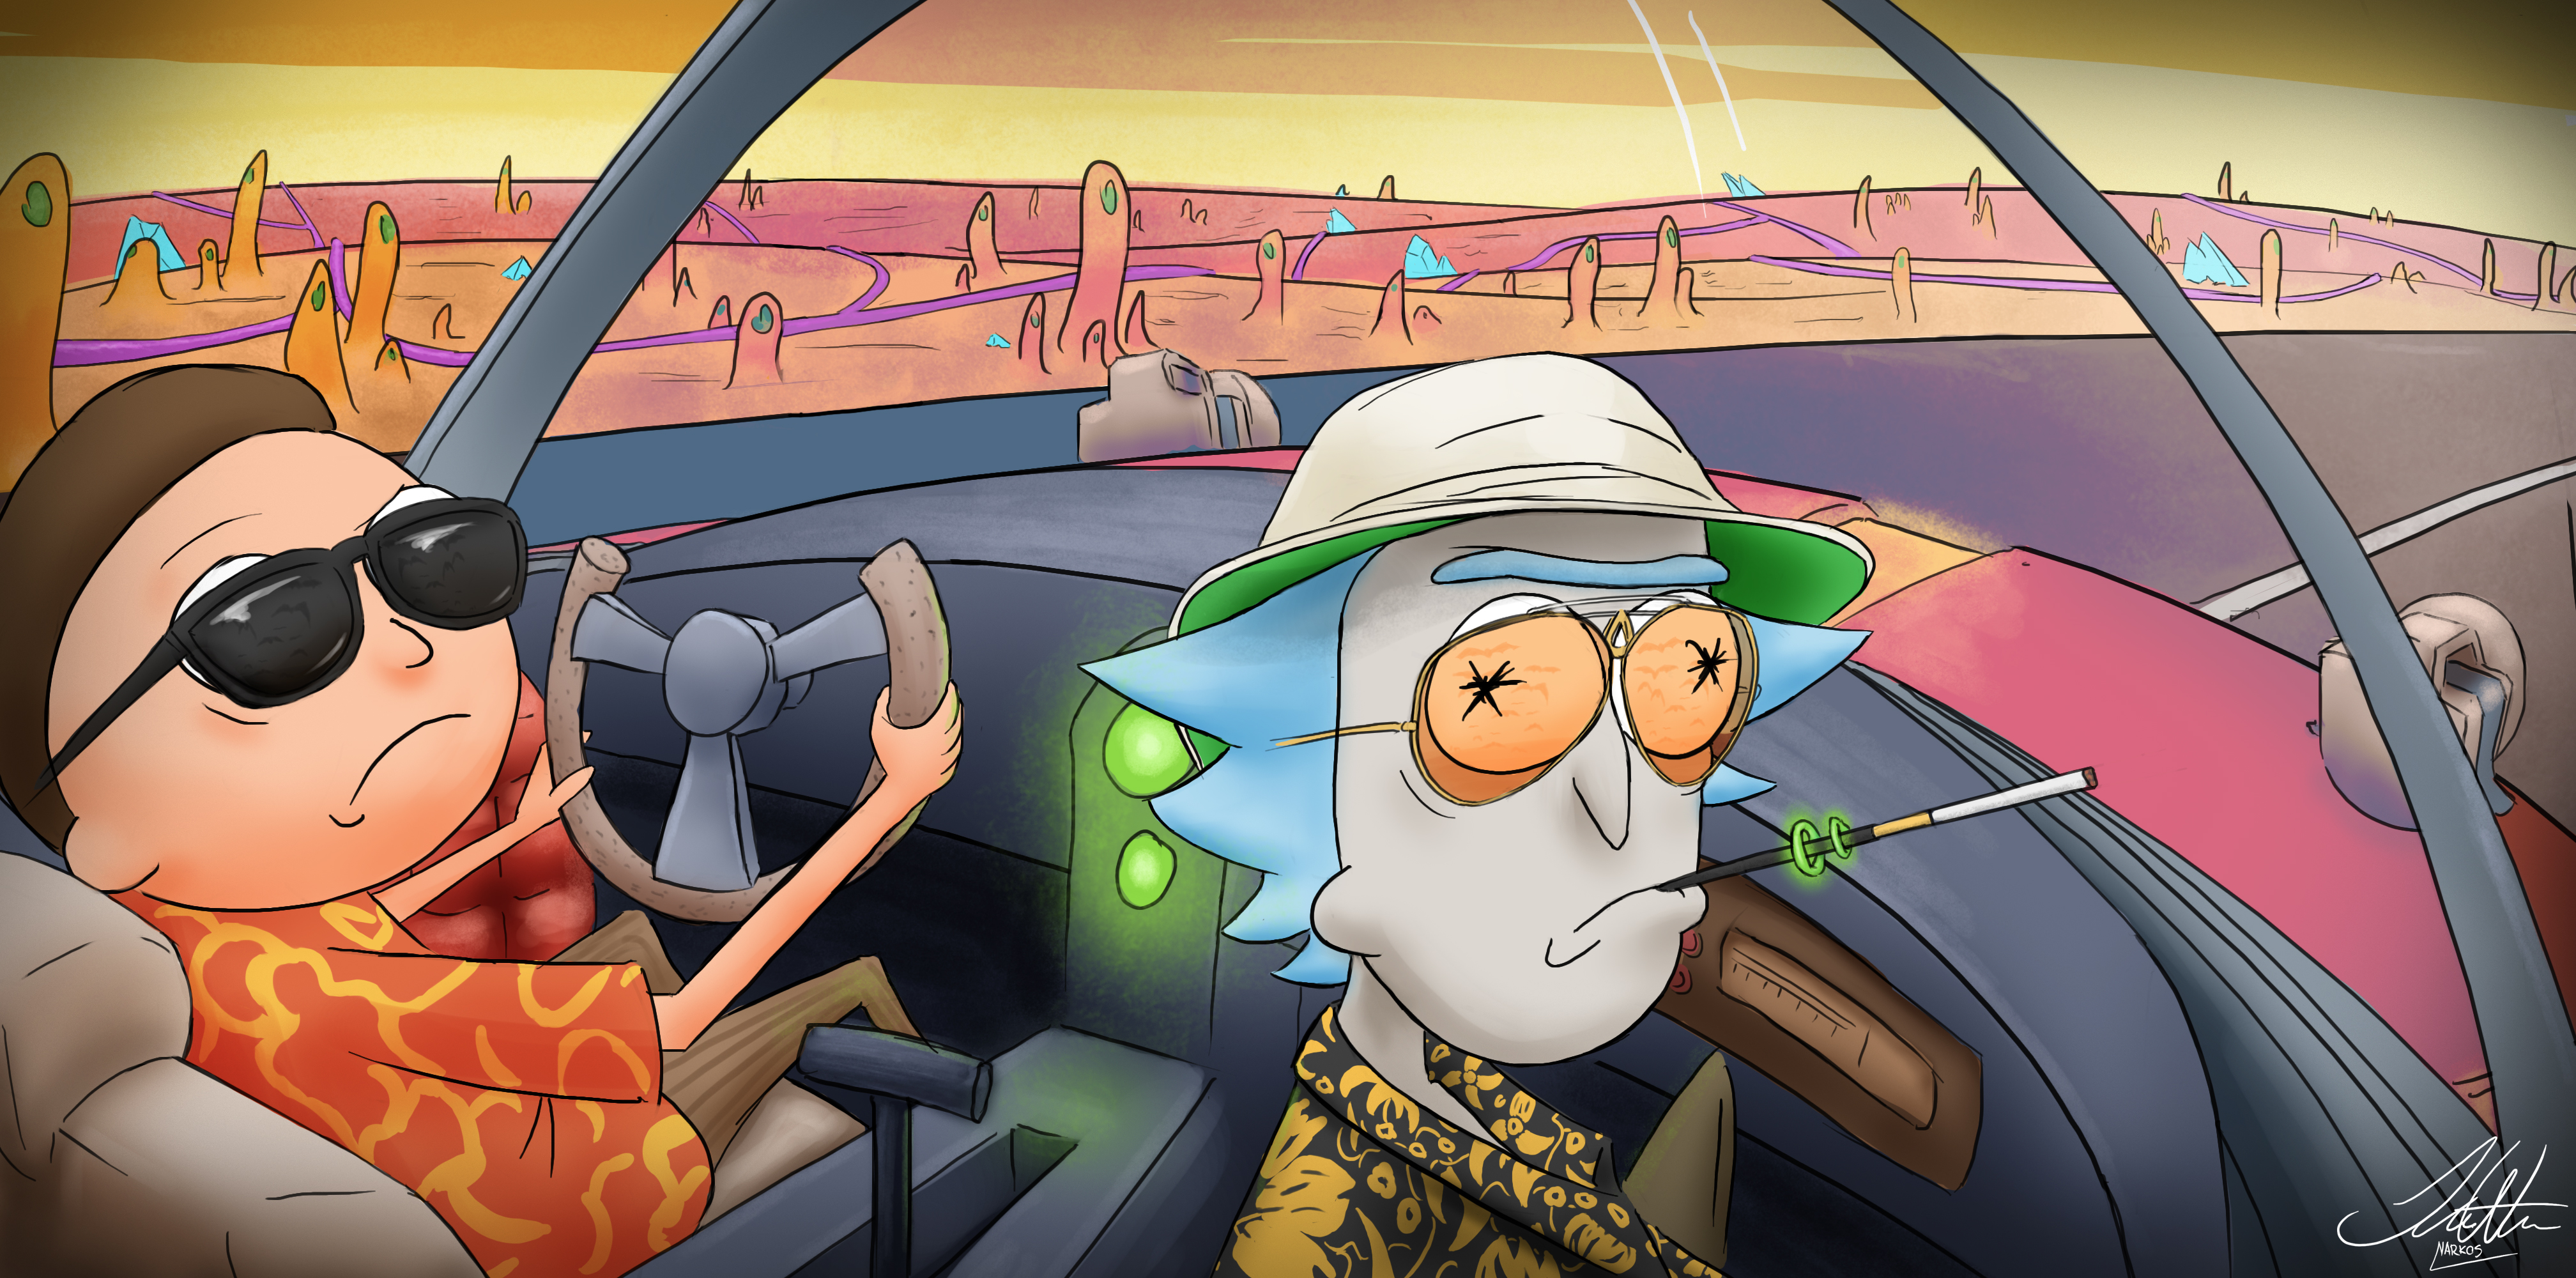 rick and morty, morty smith, tv show, fear and loathing in las vegas, rick sanchez